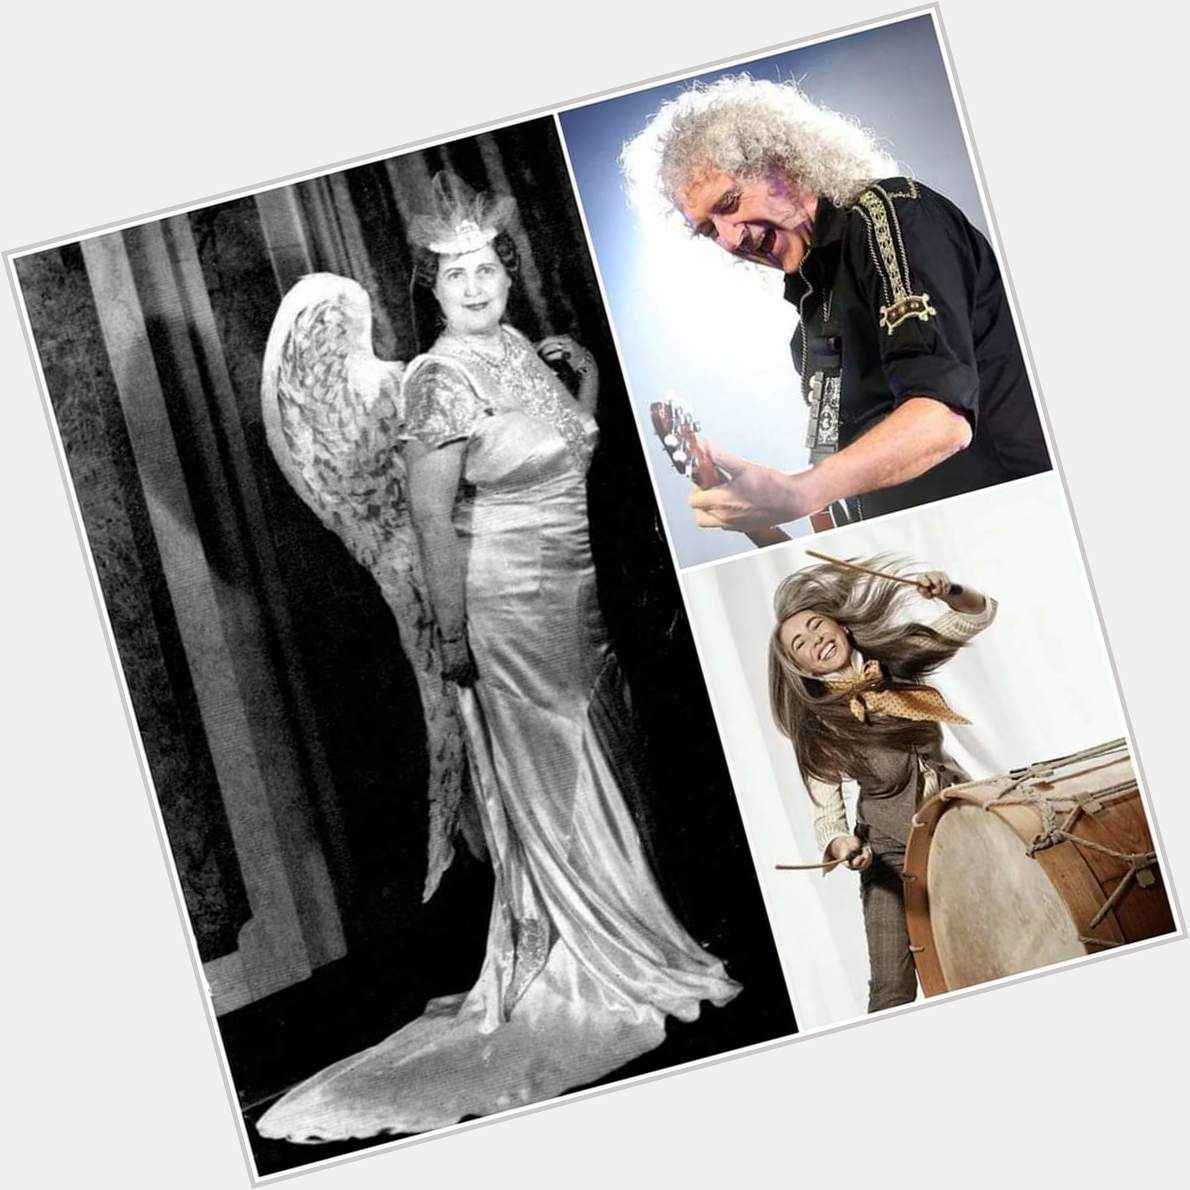 Happy Birthday to Florence Foster Jenkins, Brian May, and Evelyn Glennie! 